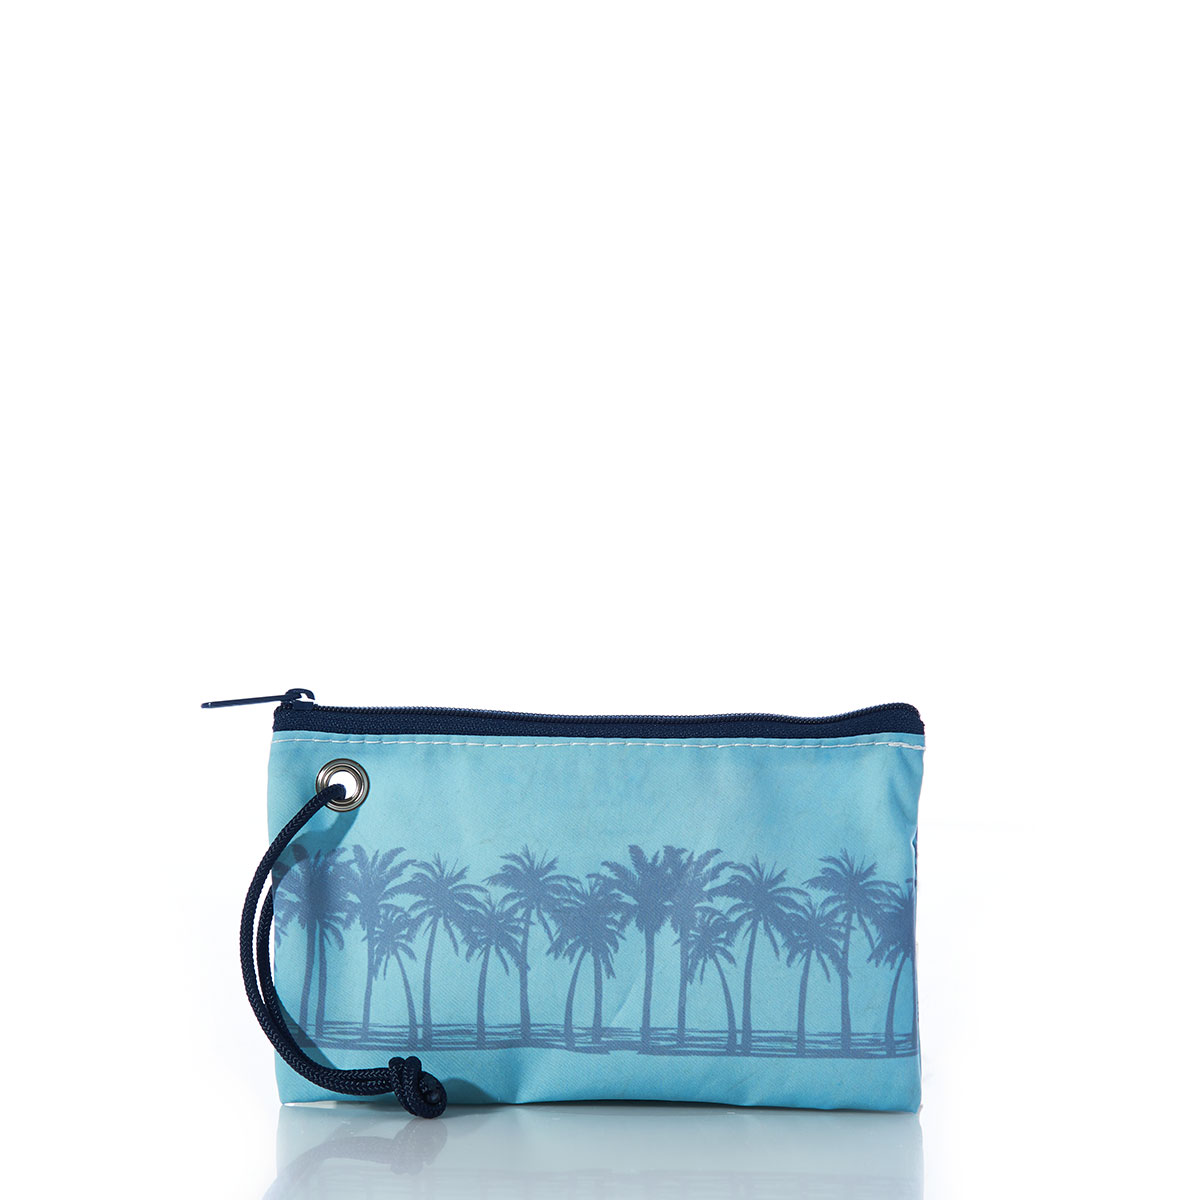 back view of a row of palm trees in front of a rising sun printed on a blue recycled sail cloth wristlet with navy zipper and wristlet strap